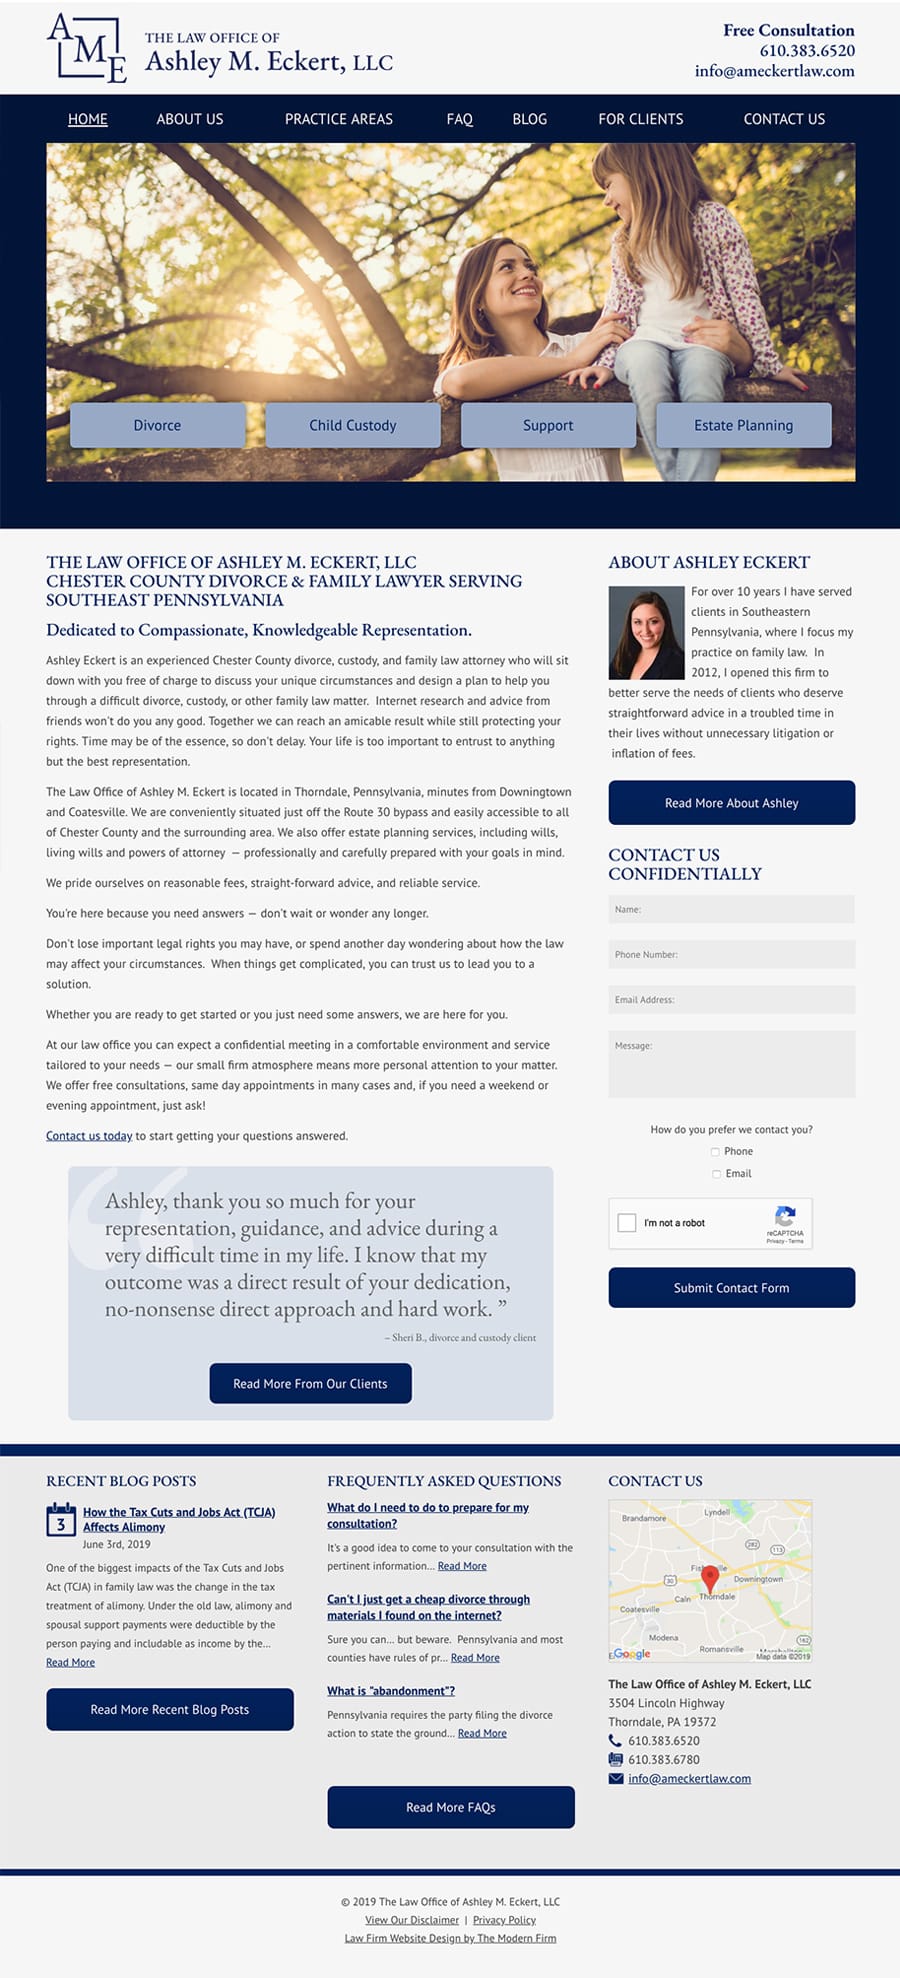 Law Firm Website Design for The Law Office of Ashley M. Eckert, LLC